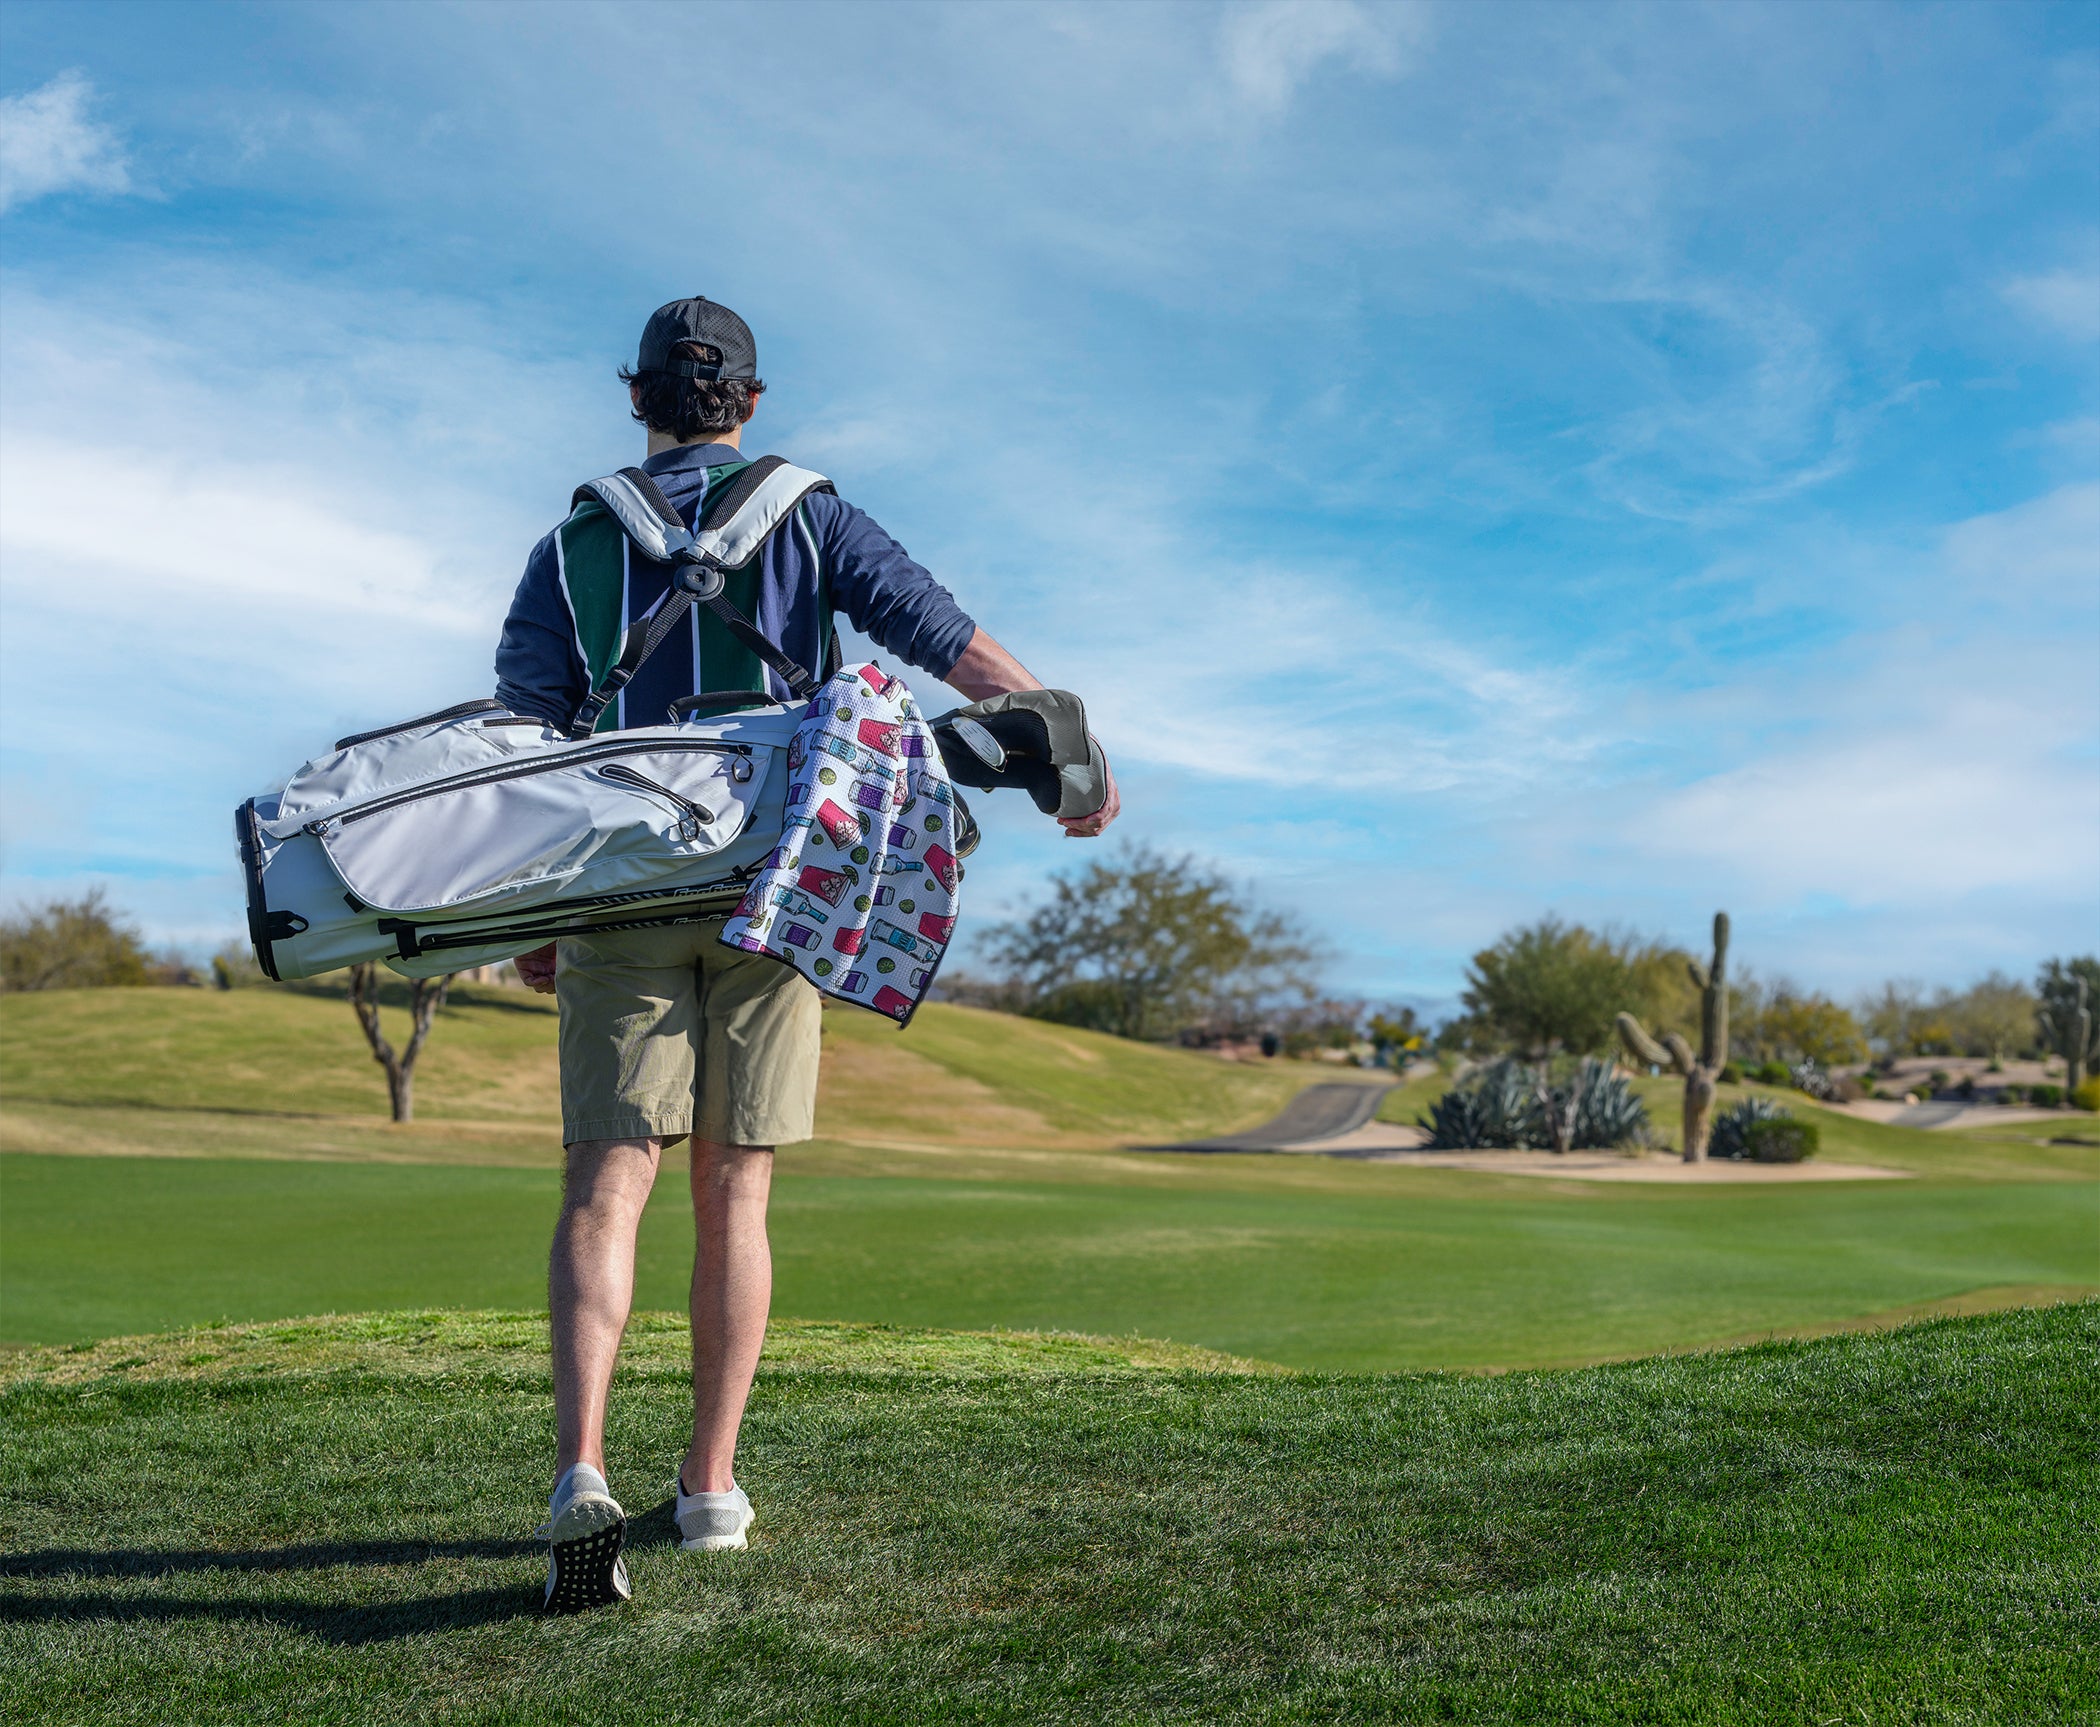 Man standing on golf course with a golf bag on his back and a towel hanging from it